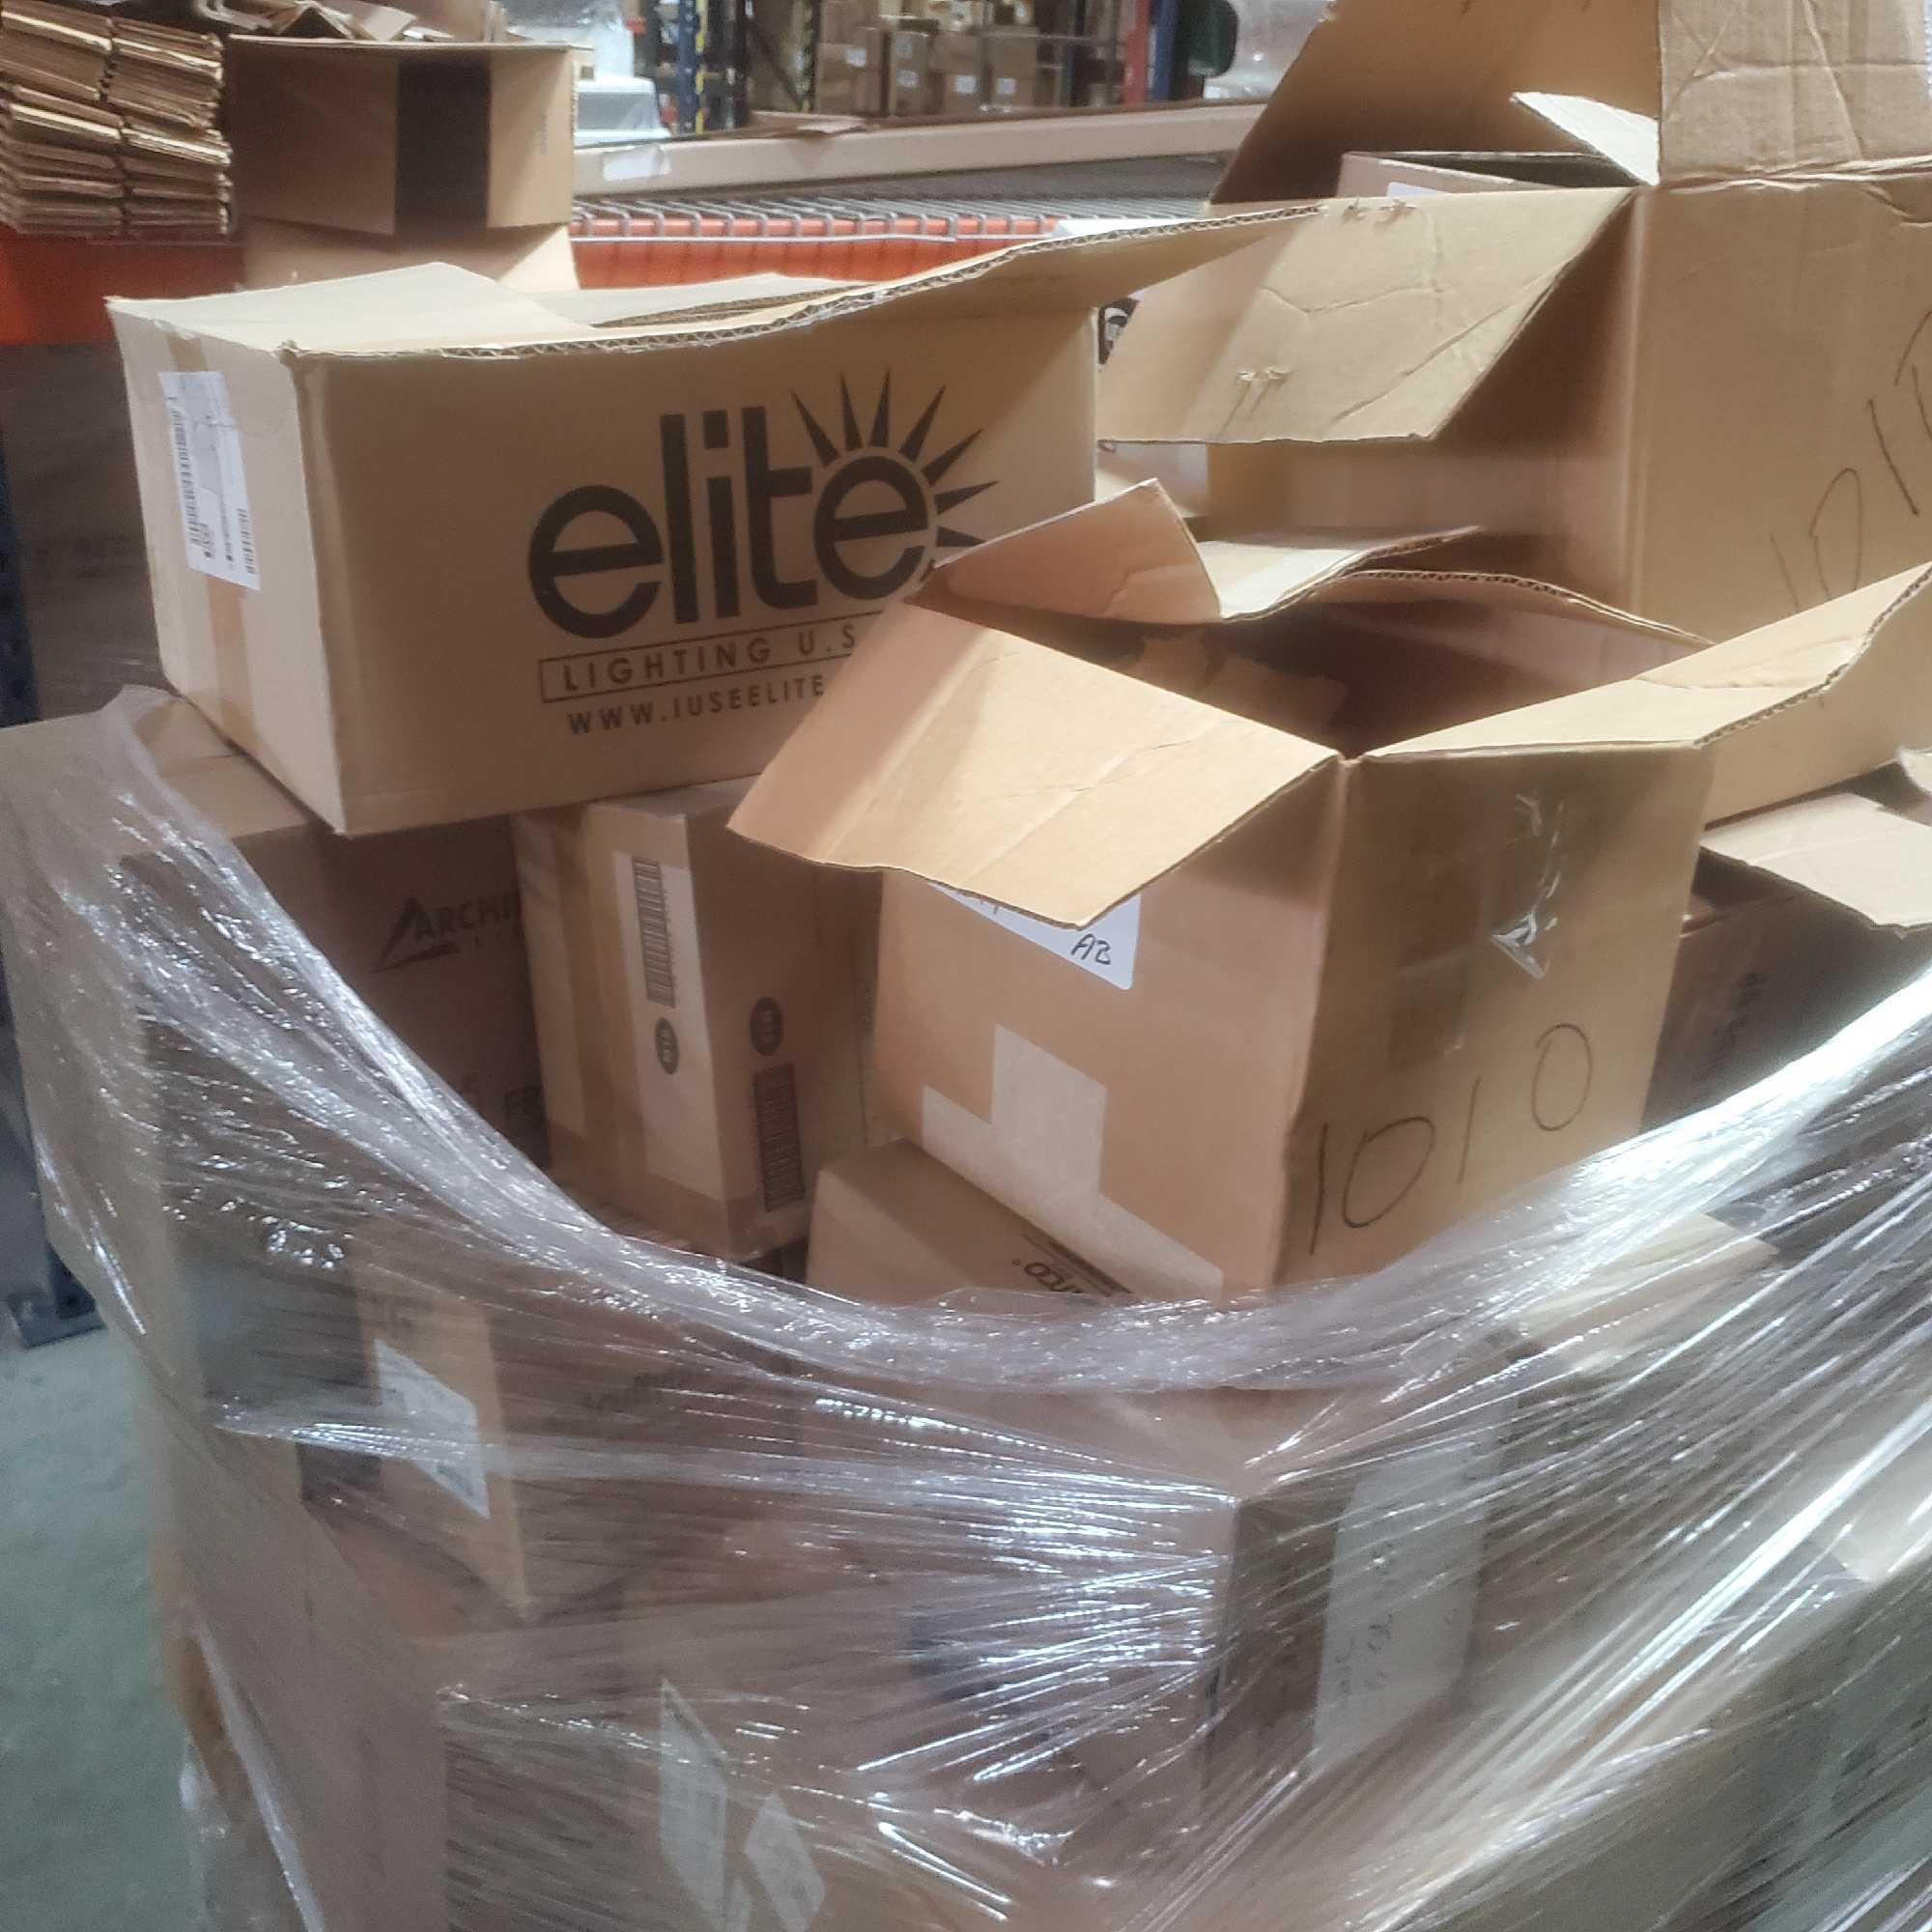 Pallet of tech recessed lighting bulbs and hardware